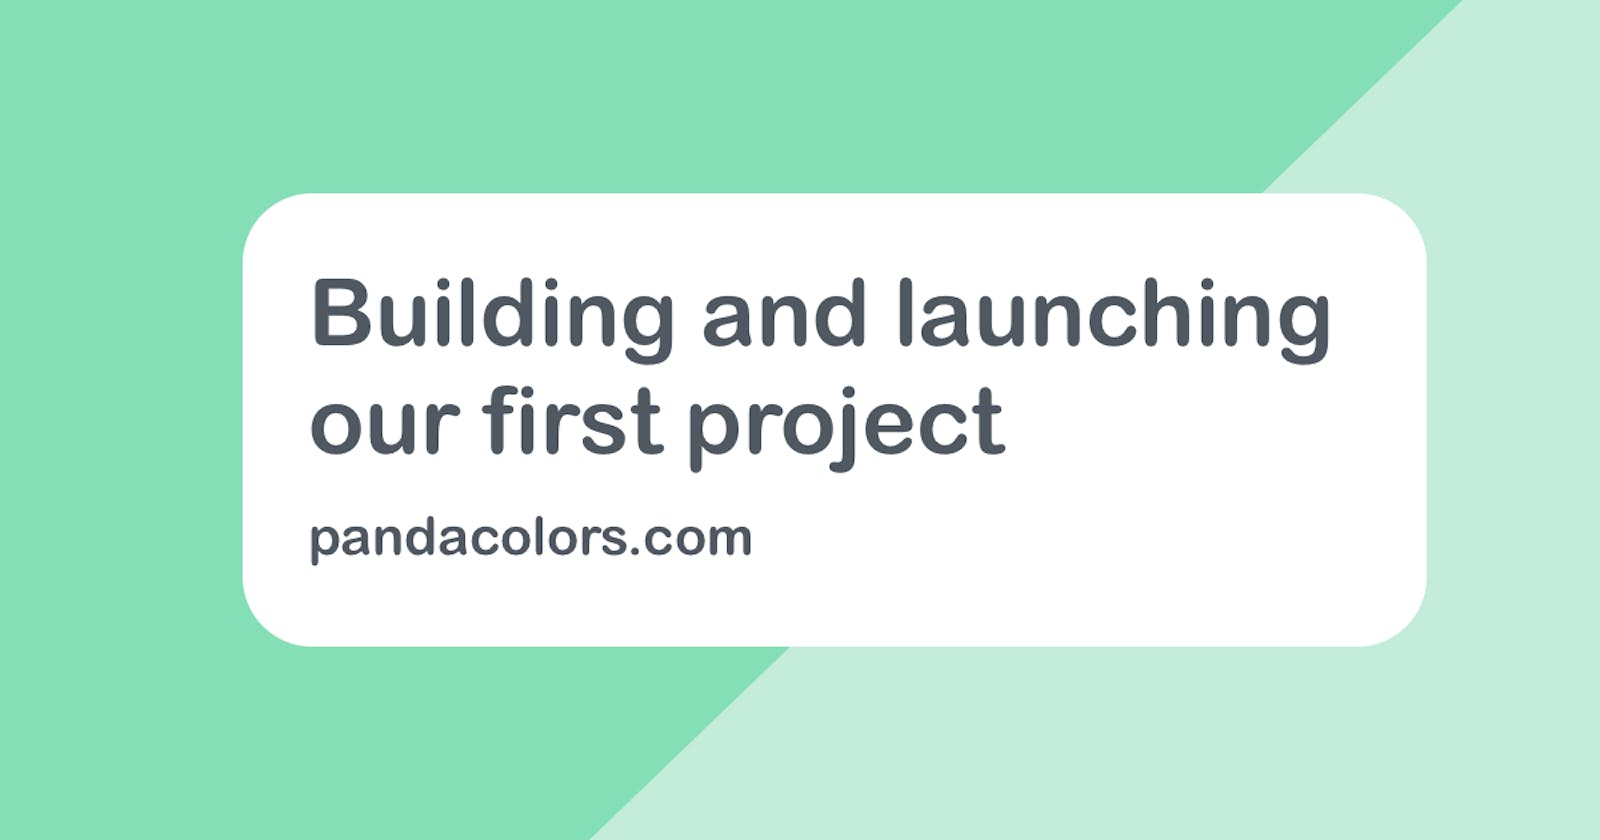 Building and launching our first project - Pandacolors.com